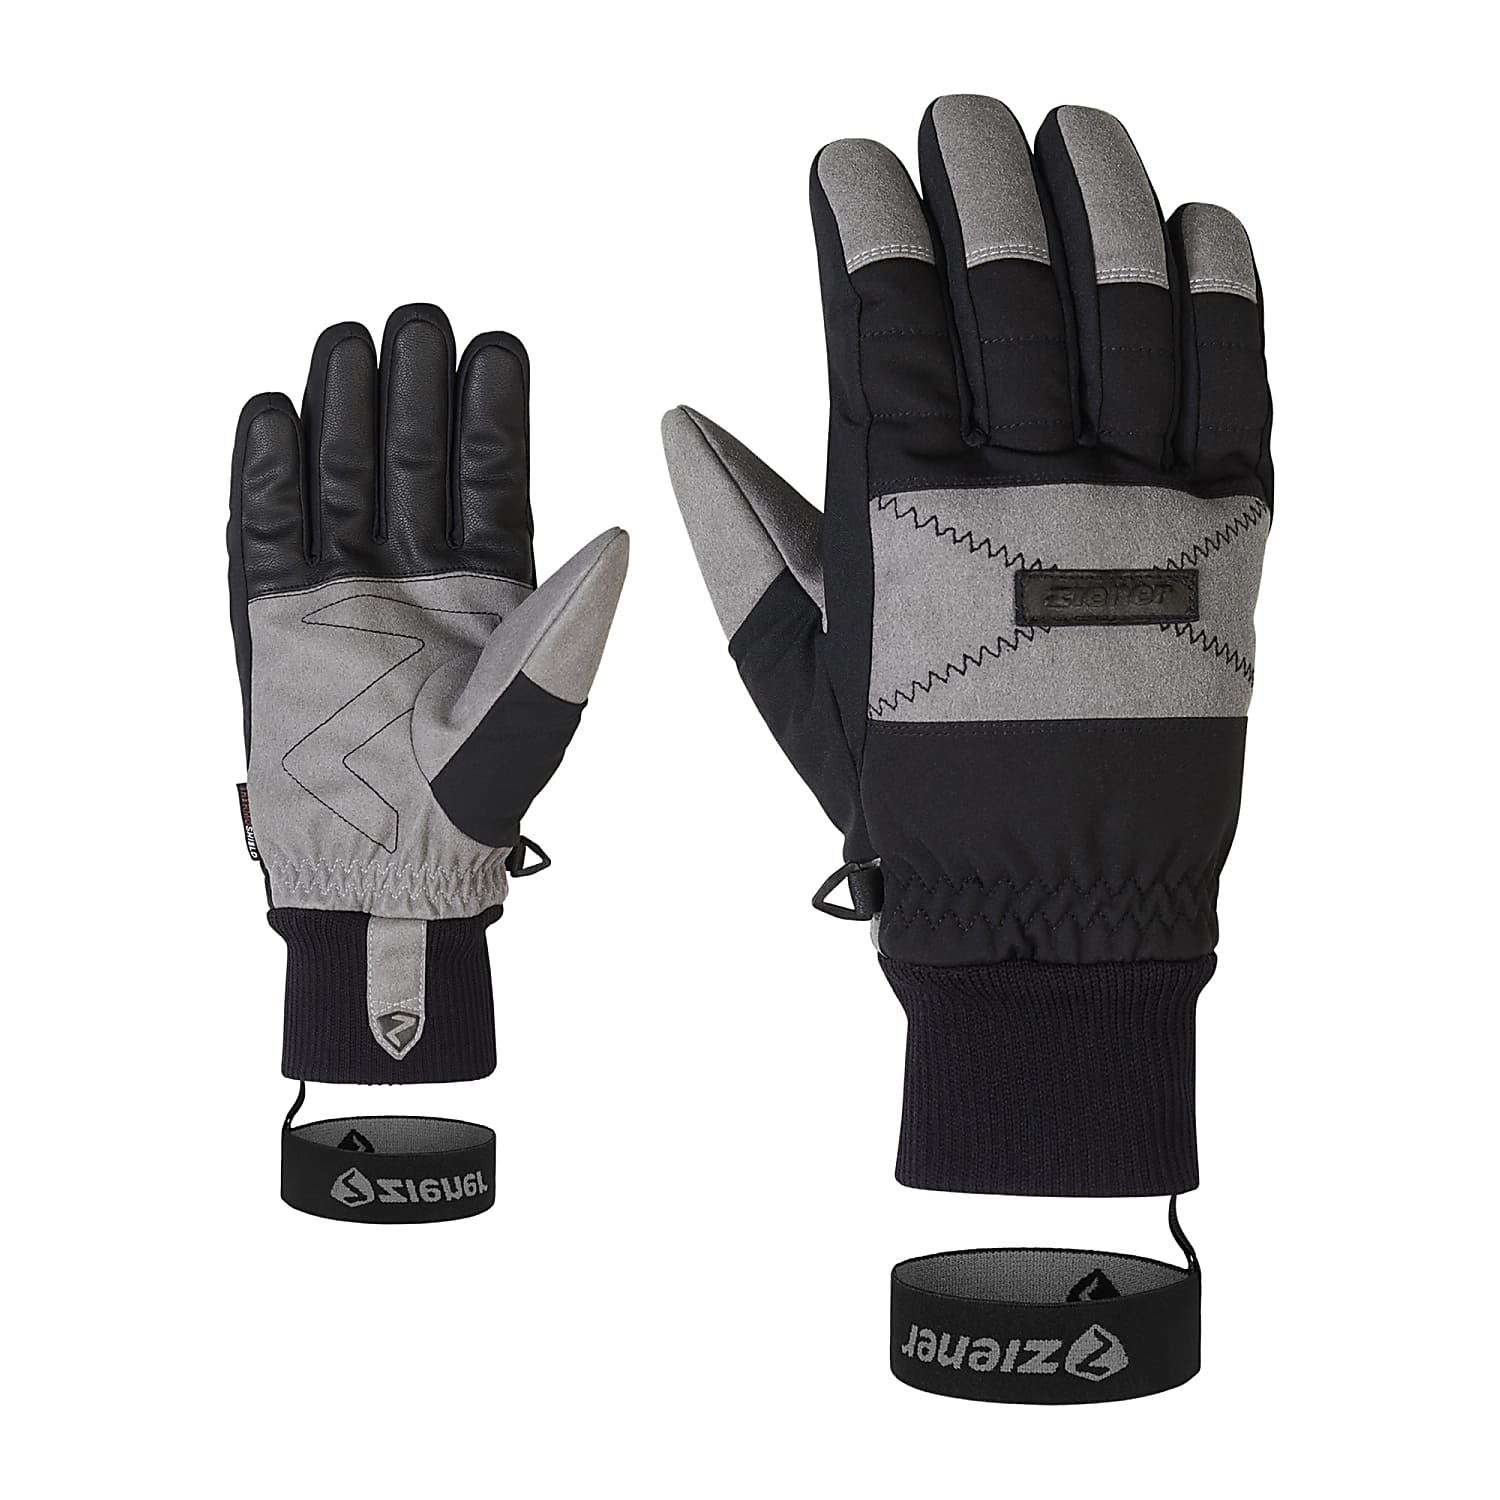 Ziener GENDO AS GLOVE, Black - Fast and cheap shipping